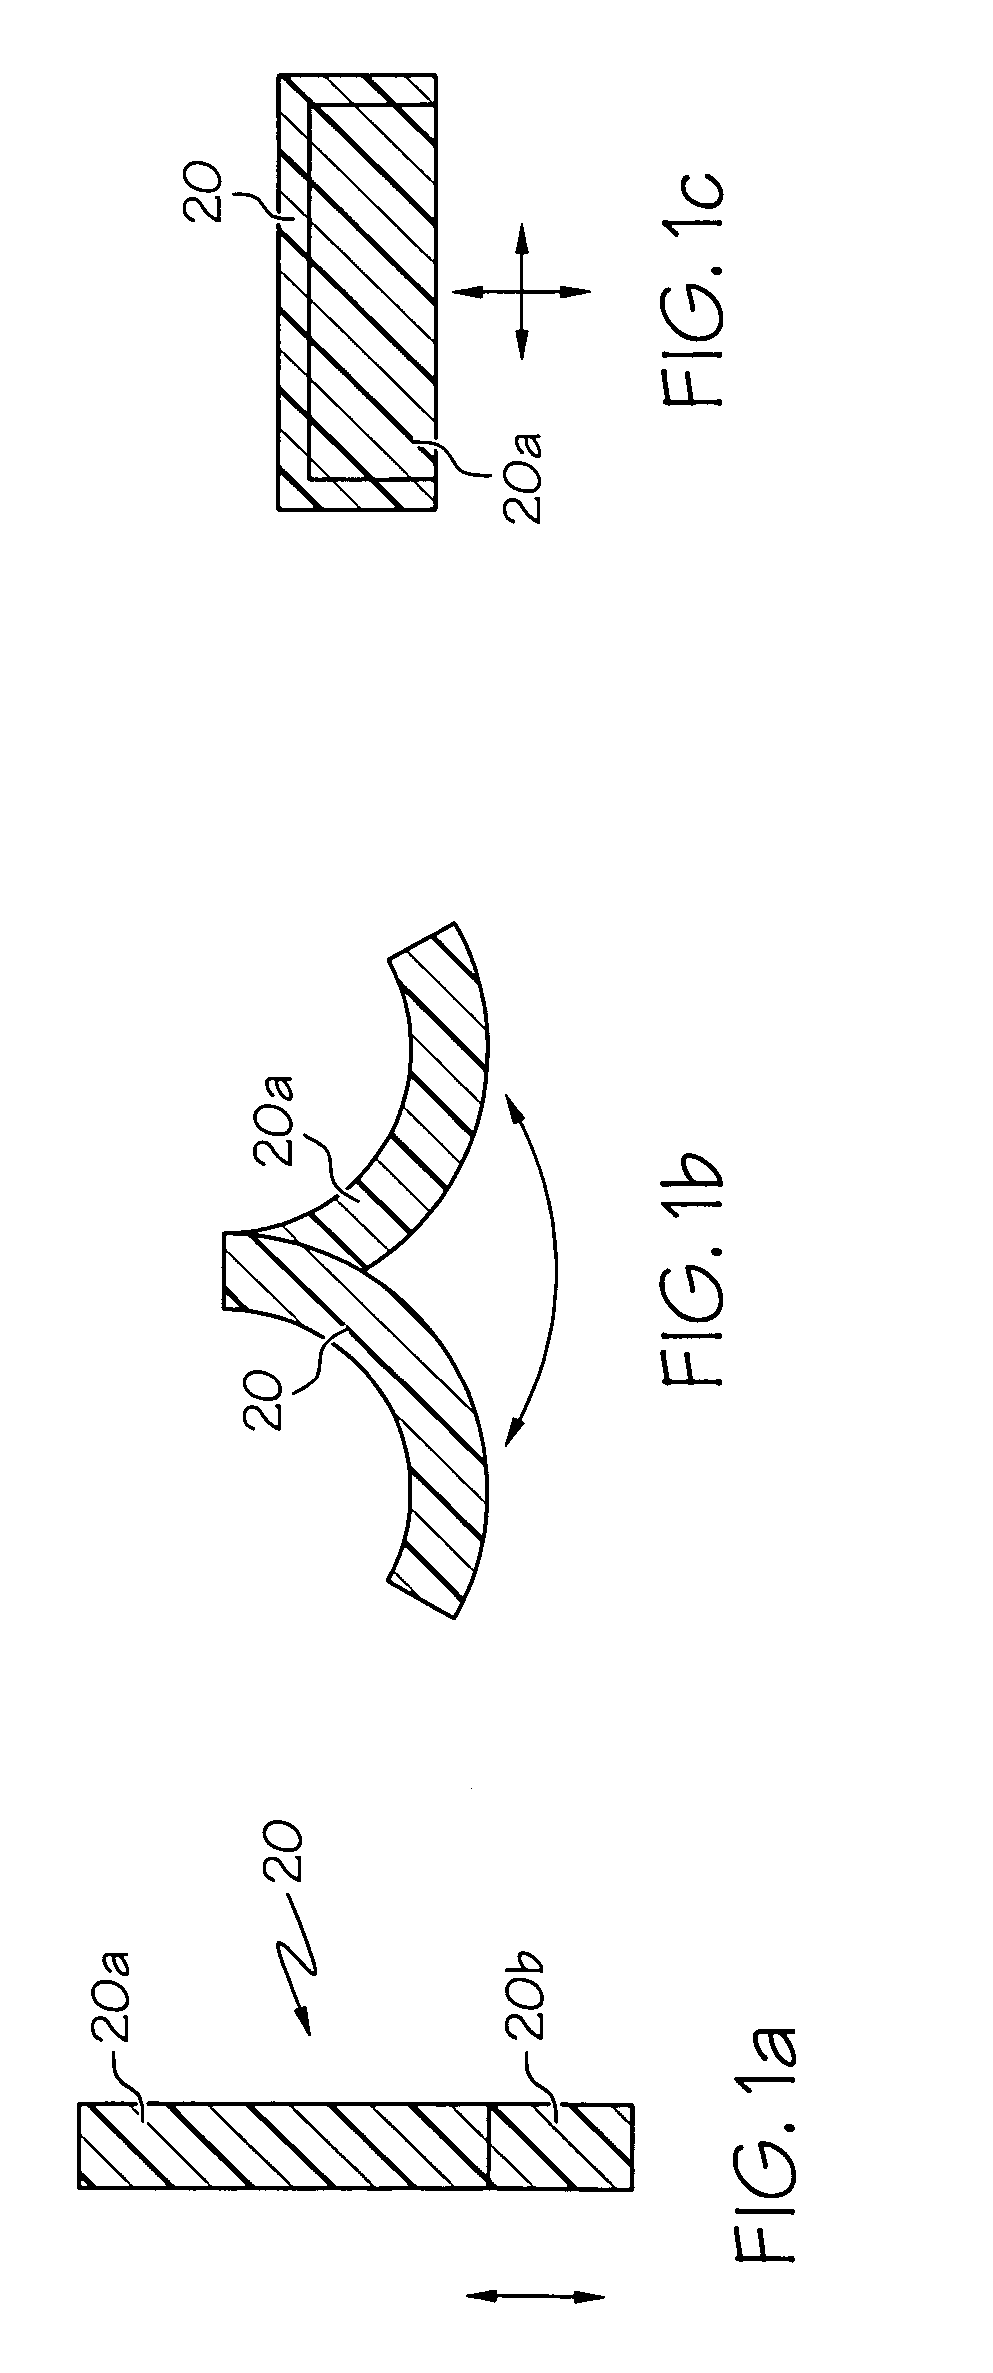 Variable stiffness catheter assembly